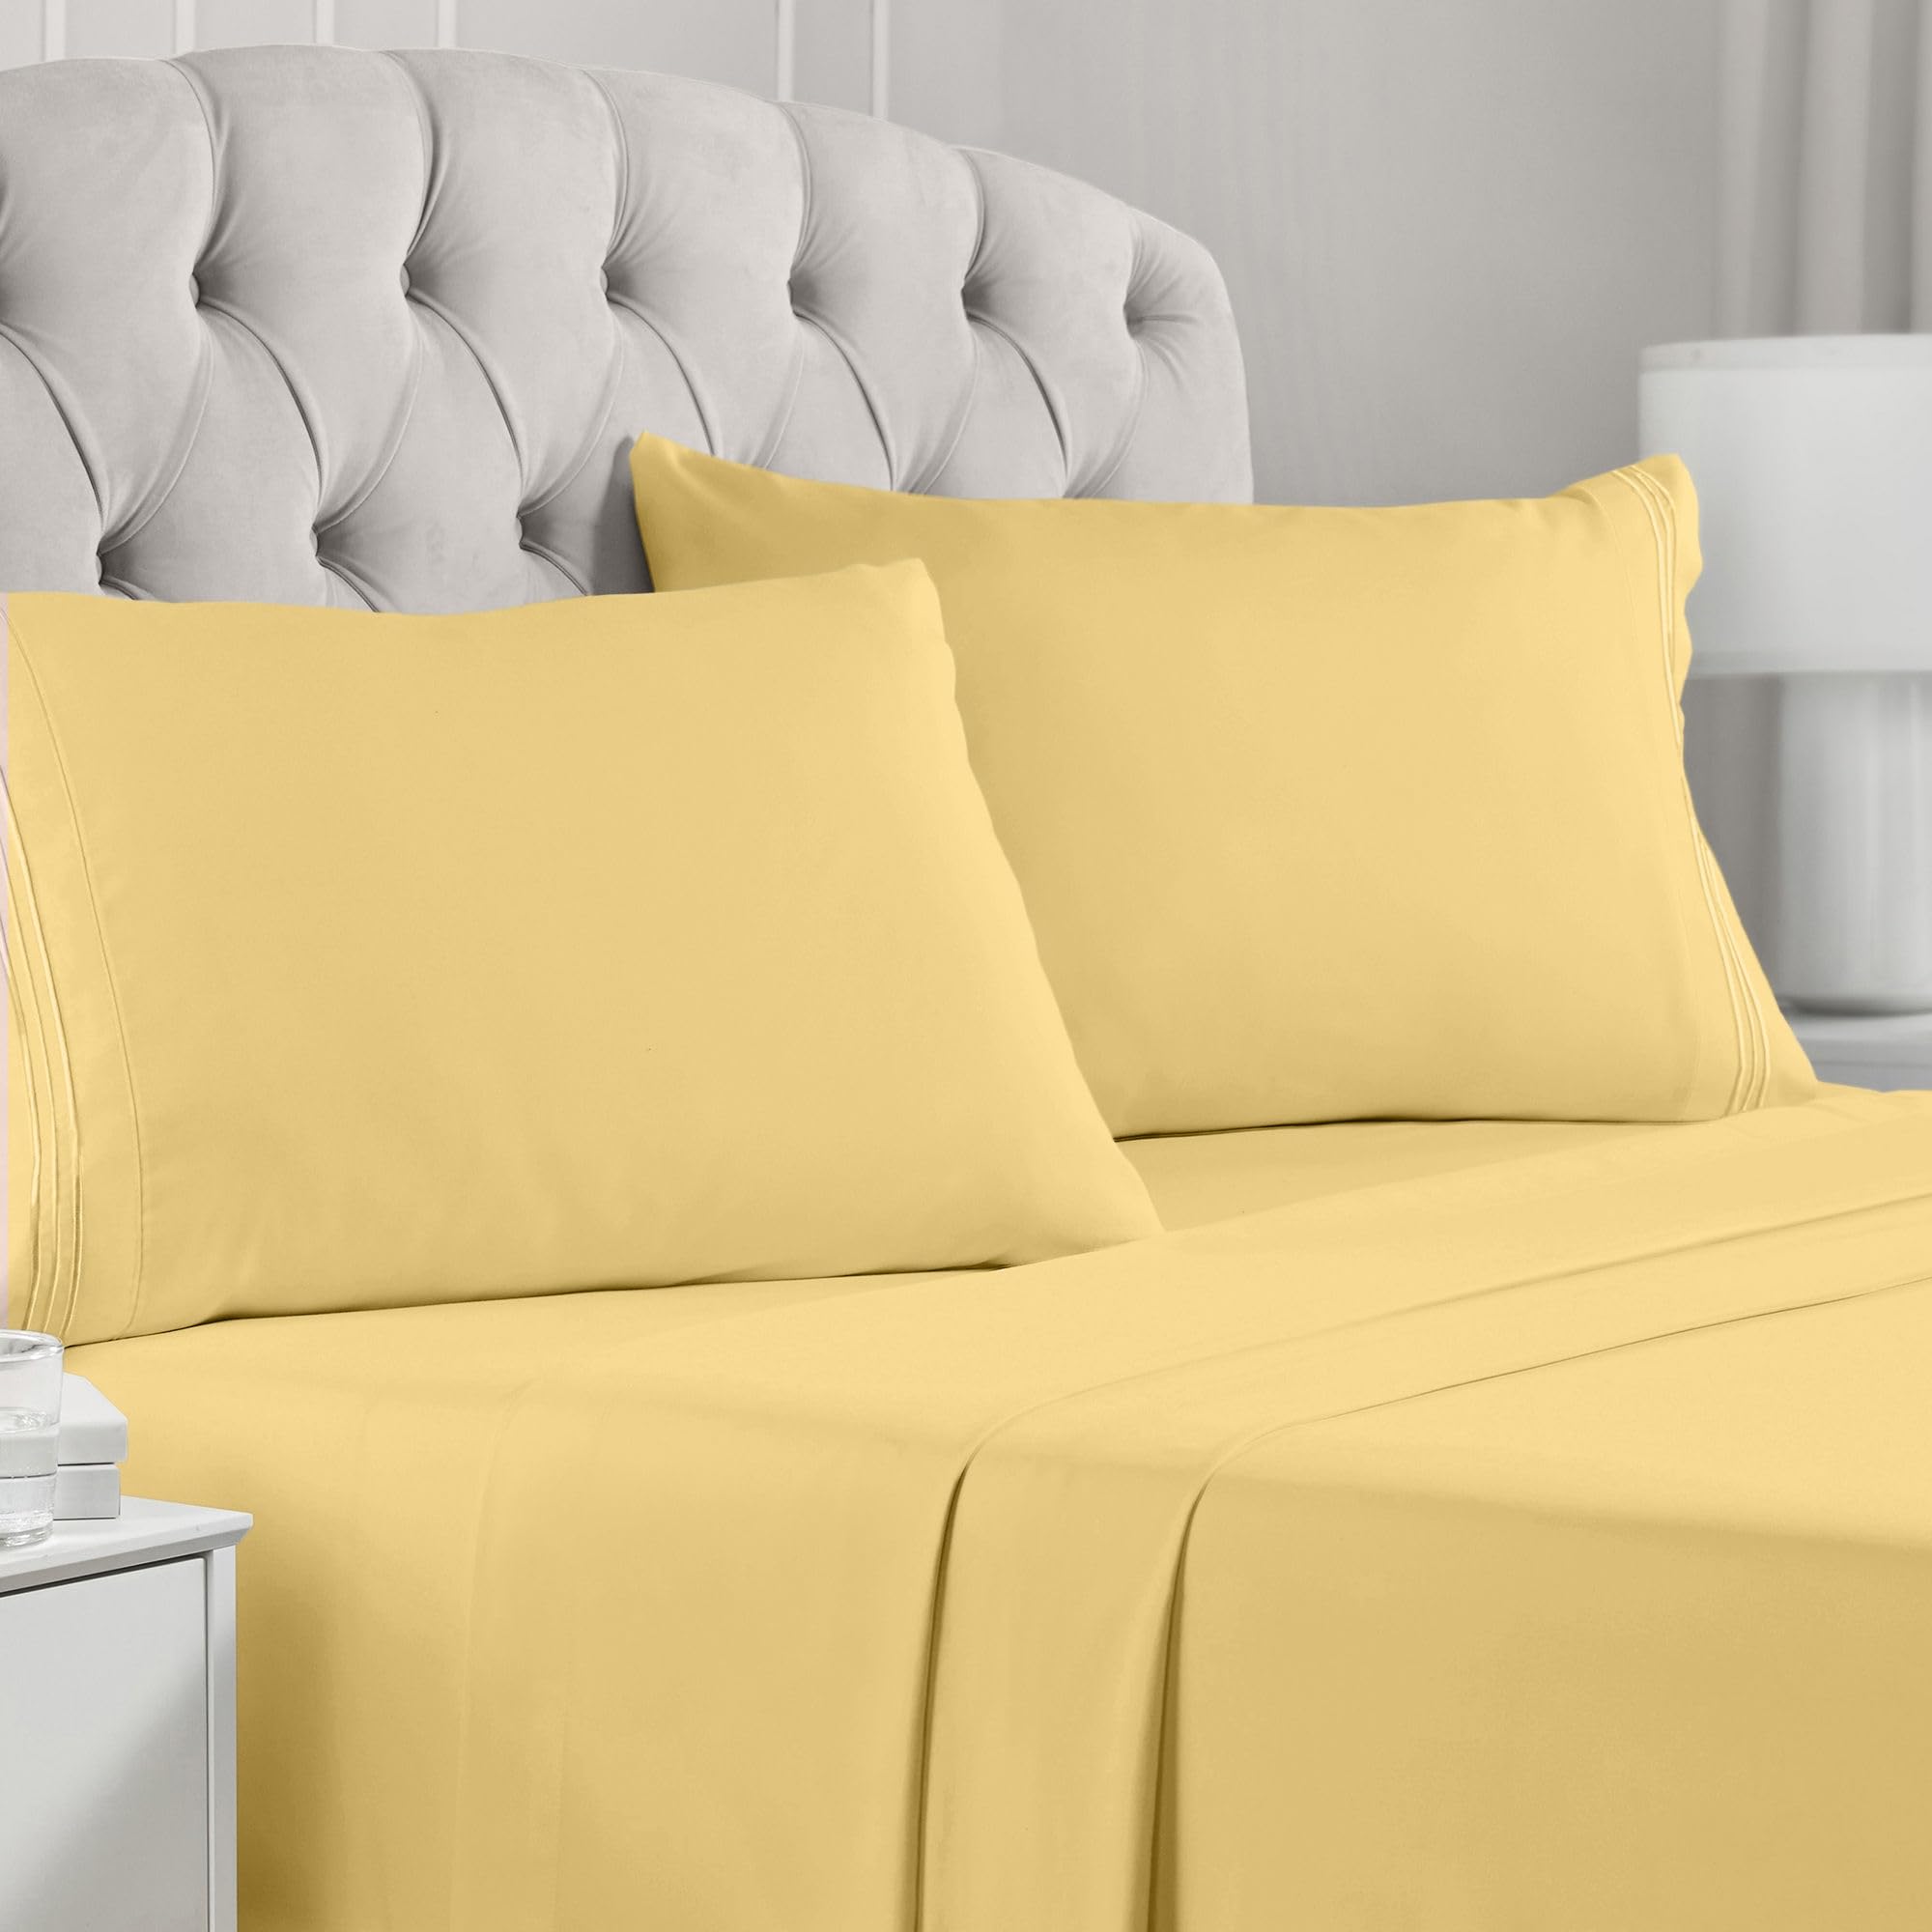 Book Cover Mellanni King Size Sheet Set - 4 Piece Iconic Collection Bedding Sheets & Pillowcases - Luxury, Extra Soft, Cooling Bed Sheets - Deep Pocket up to 16